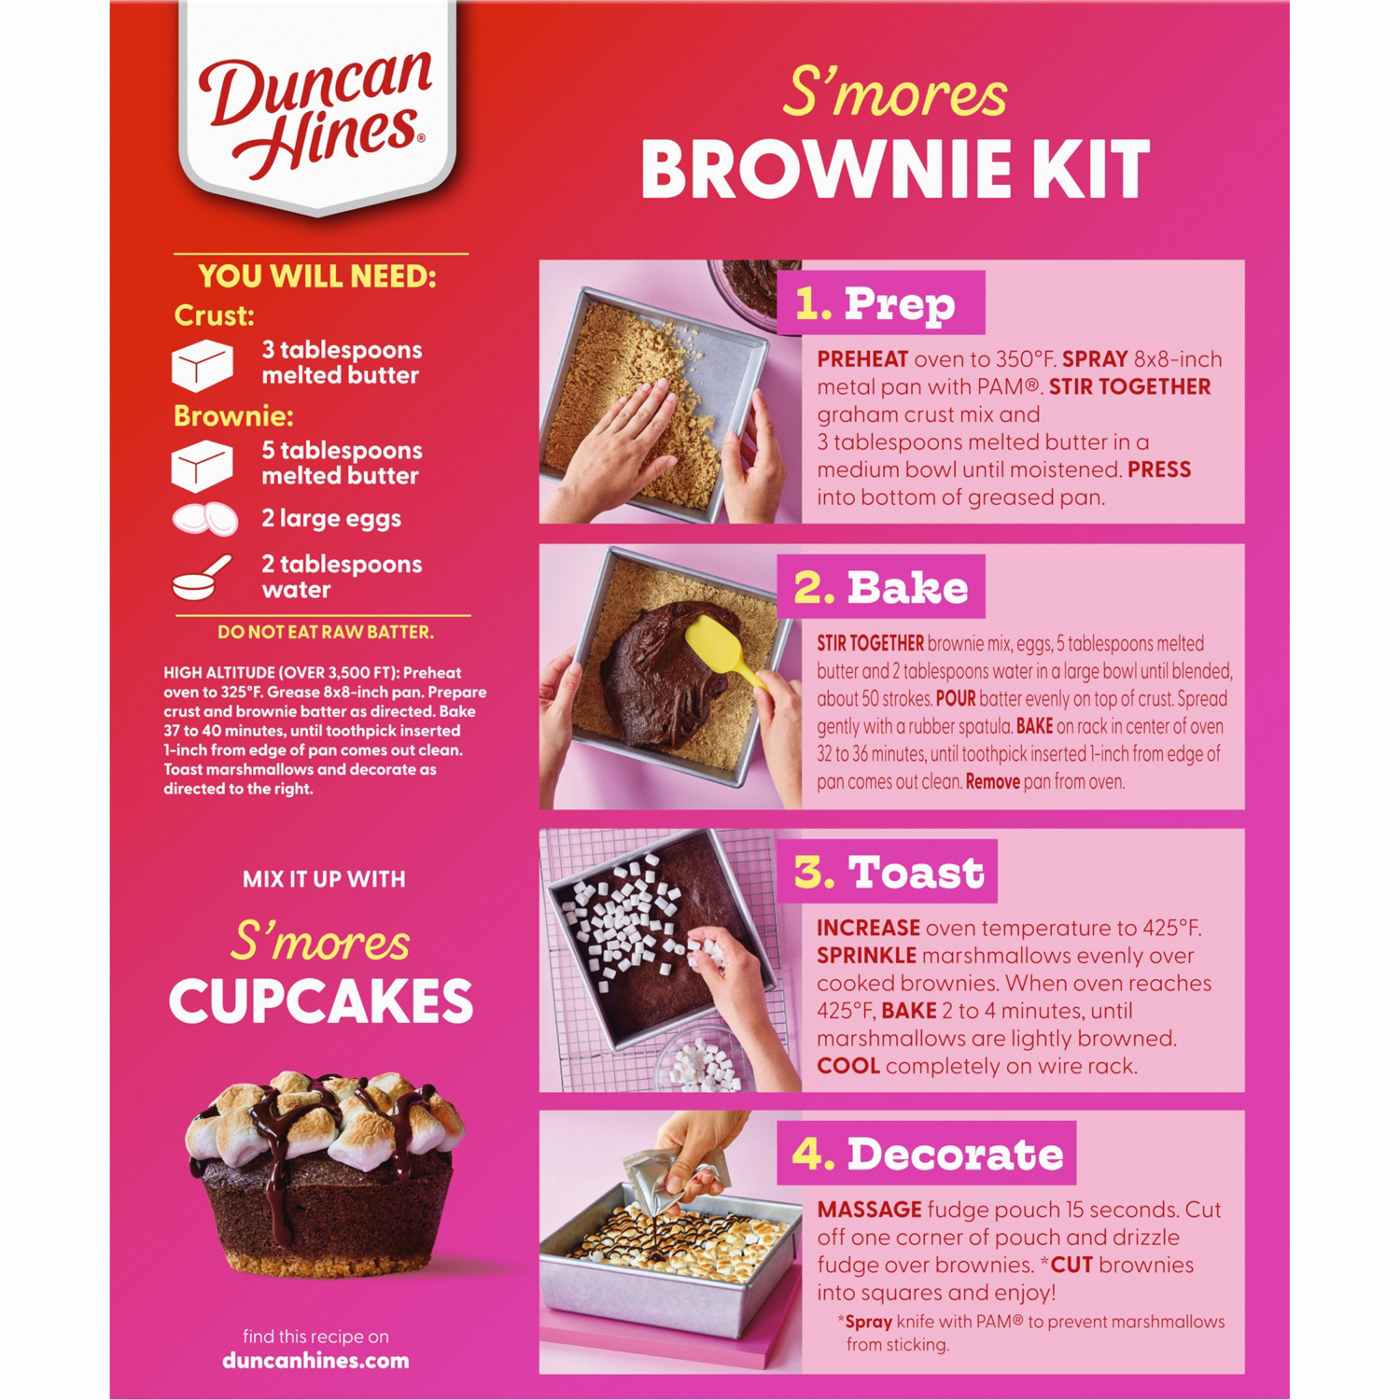 Duncan Hines EPIC Smores Brownie Mix Kit; image 5 of 7